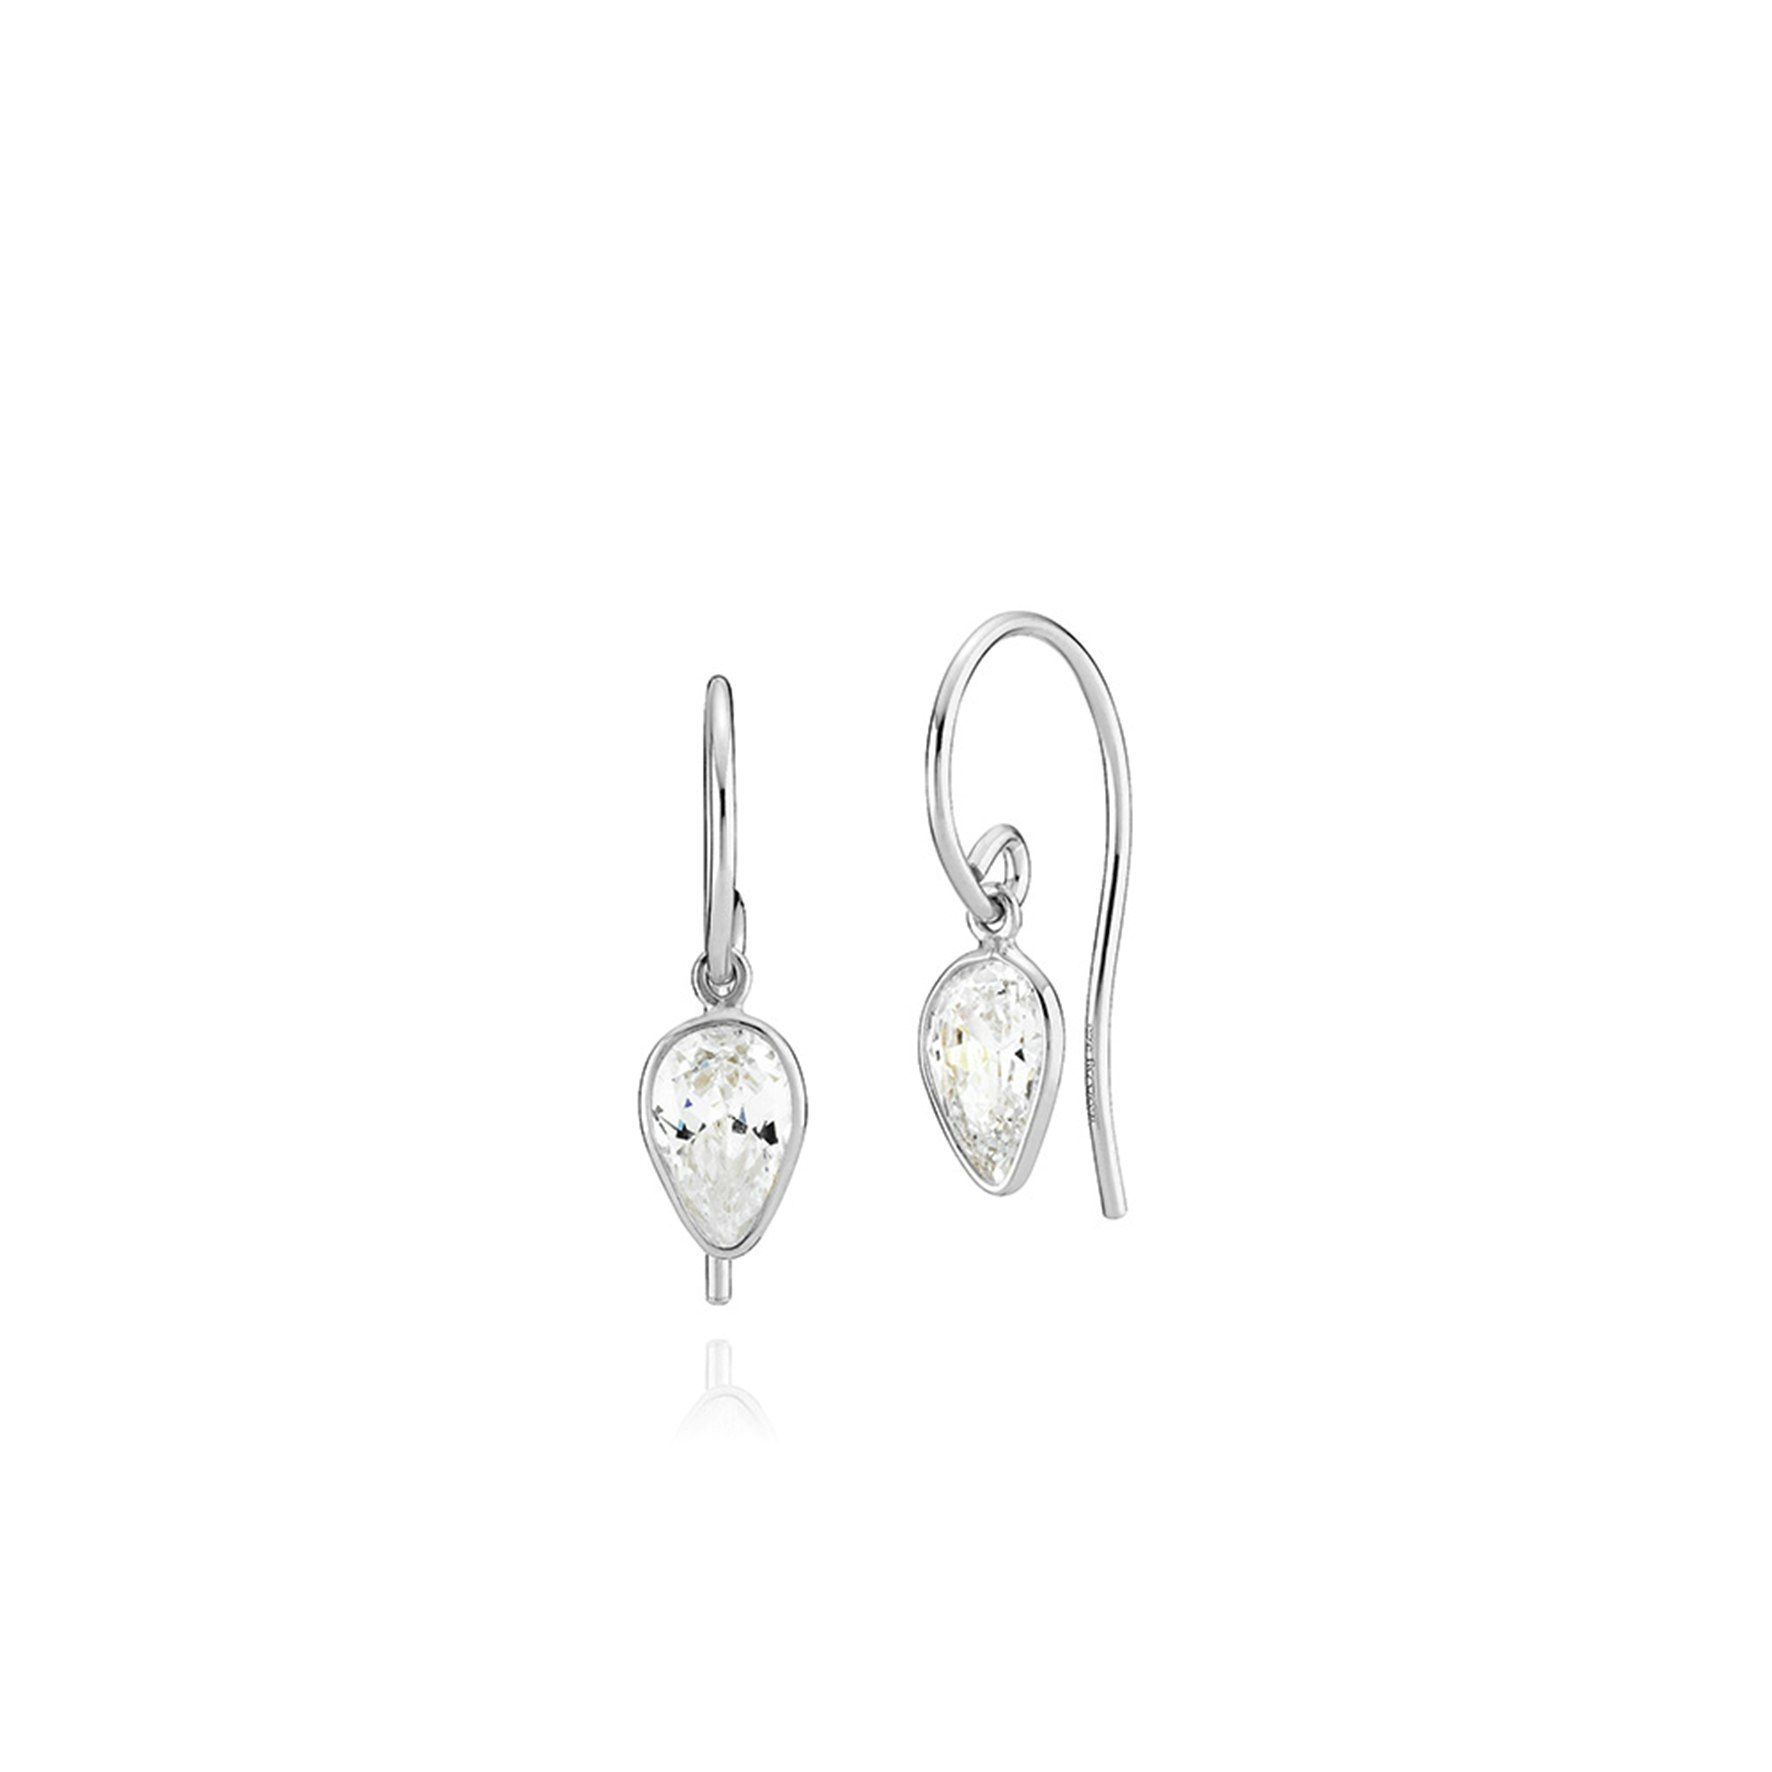 Aya Small Earrings von Izabel Camille in Silber Sterling 925